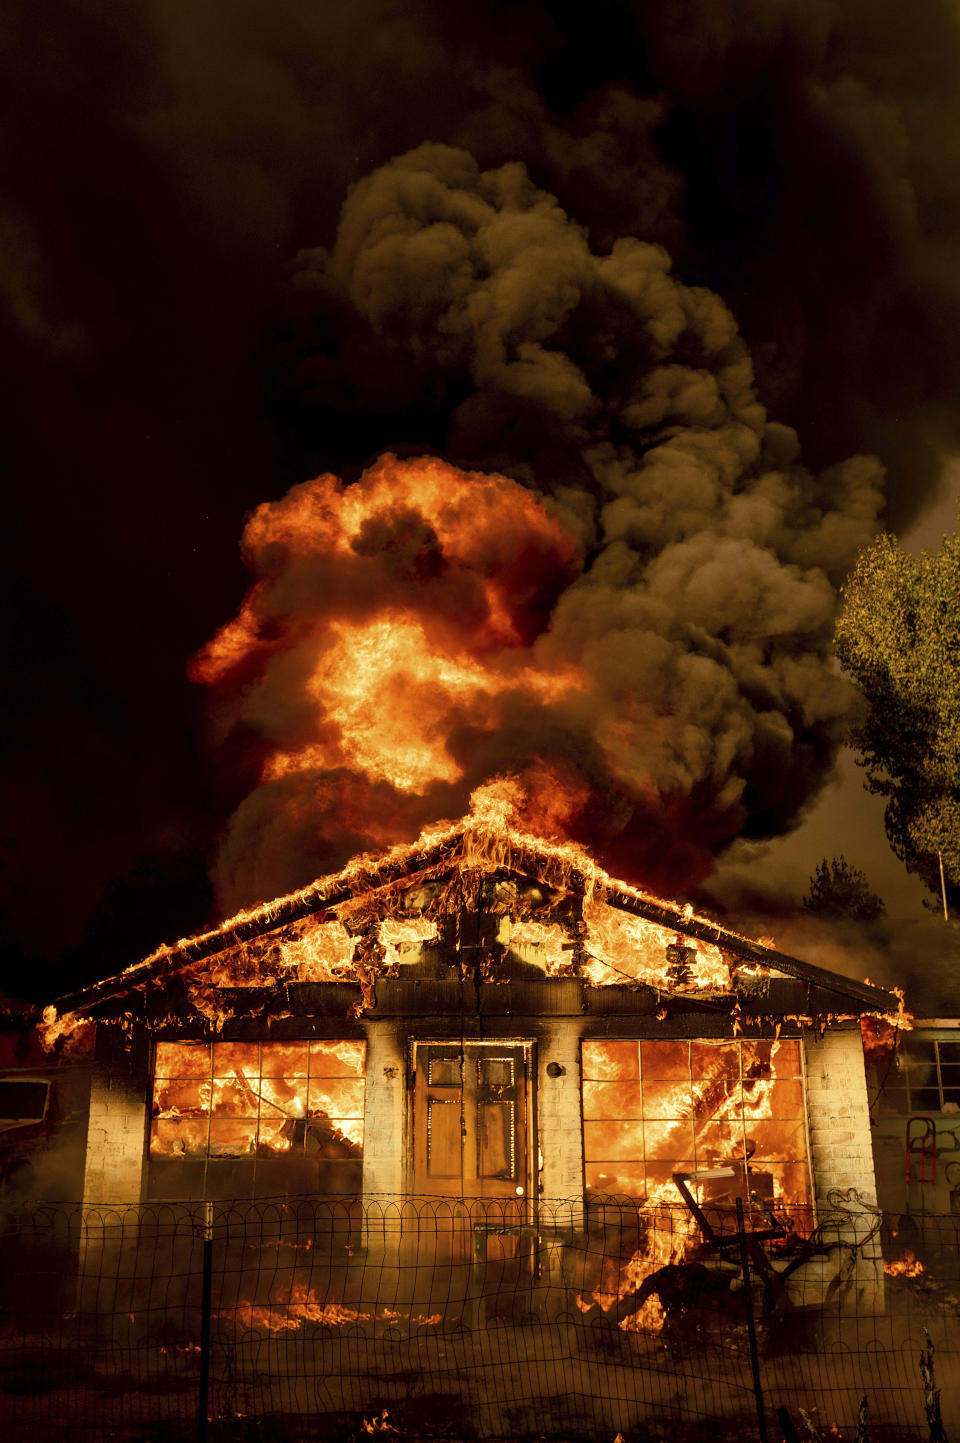 Flames consume a home as the Sugar Fire, part of the Beckwourth Complex Fire, tears through Doyle, Calif., Saturday, July 10, 2021. Pushed by heavy winds amid a heat wave, the fire came out of the hills and destroyed multiple residences in central Doyle. (AP Photo/Noah Berger)